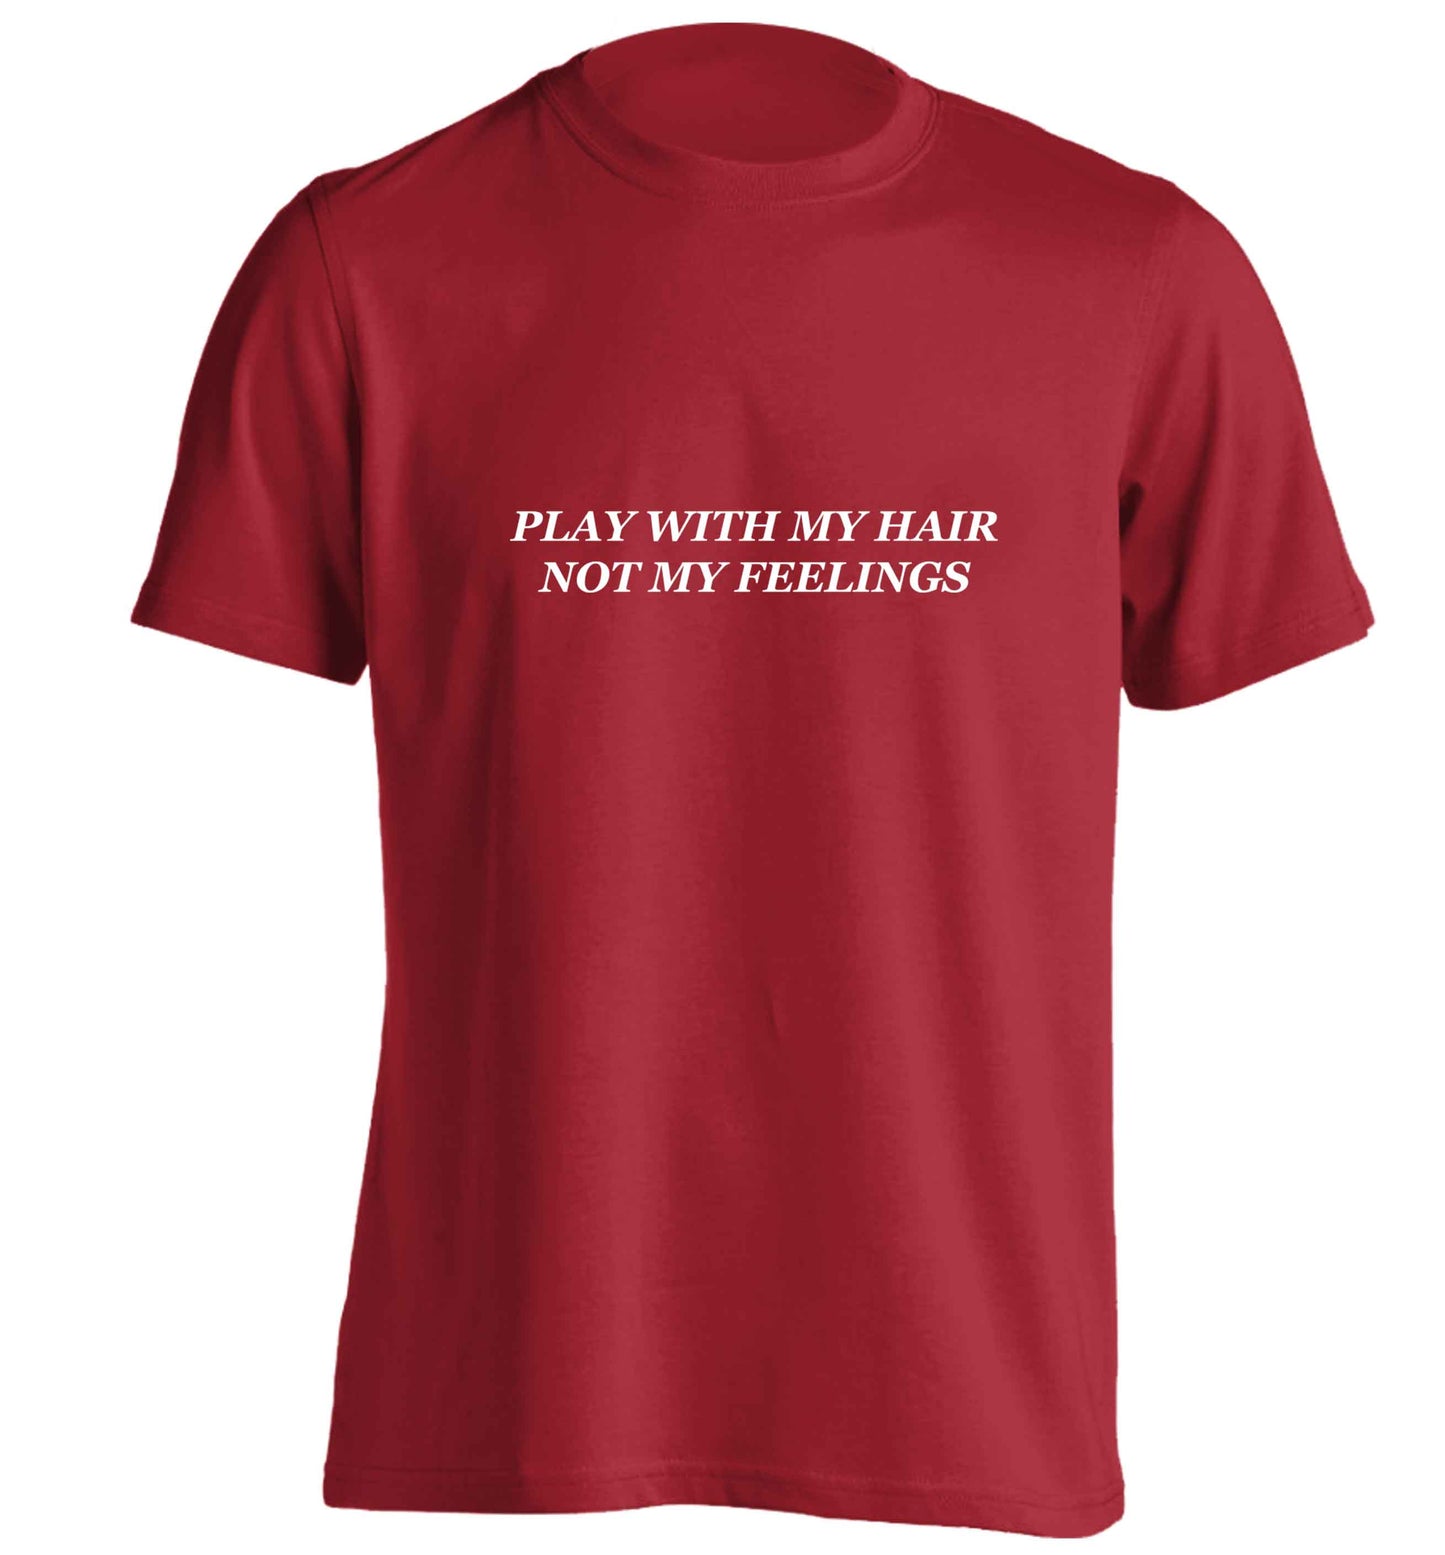 Play with my hair not my feelings adults unisex red Tshirt 2XL